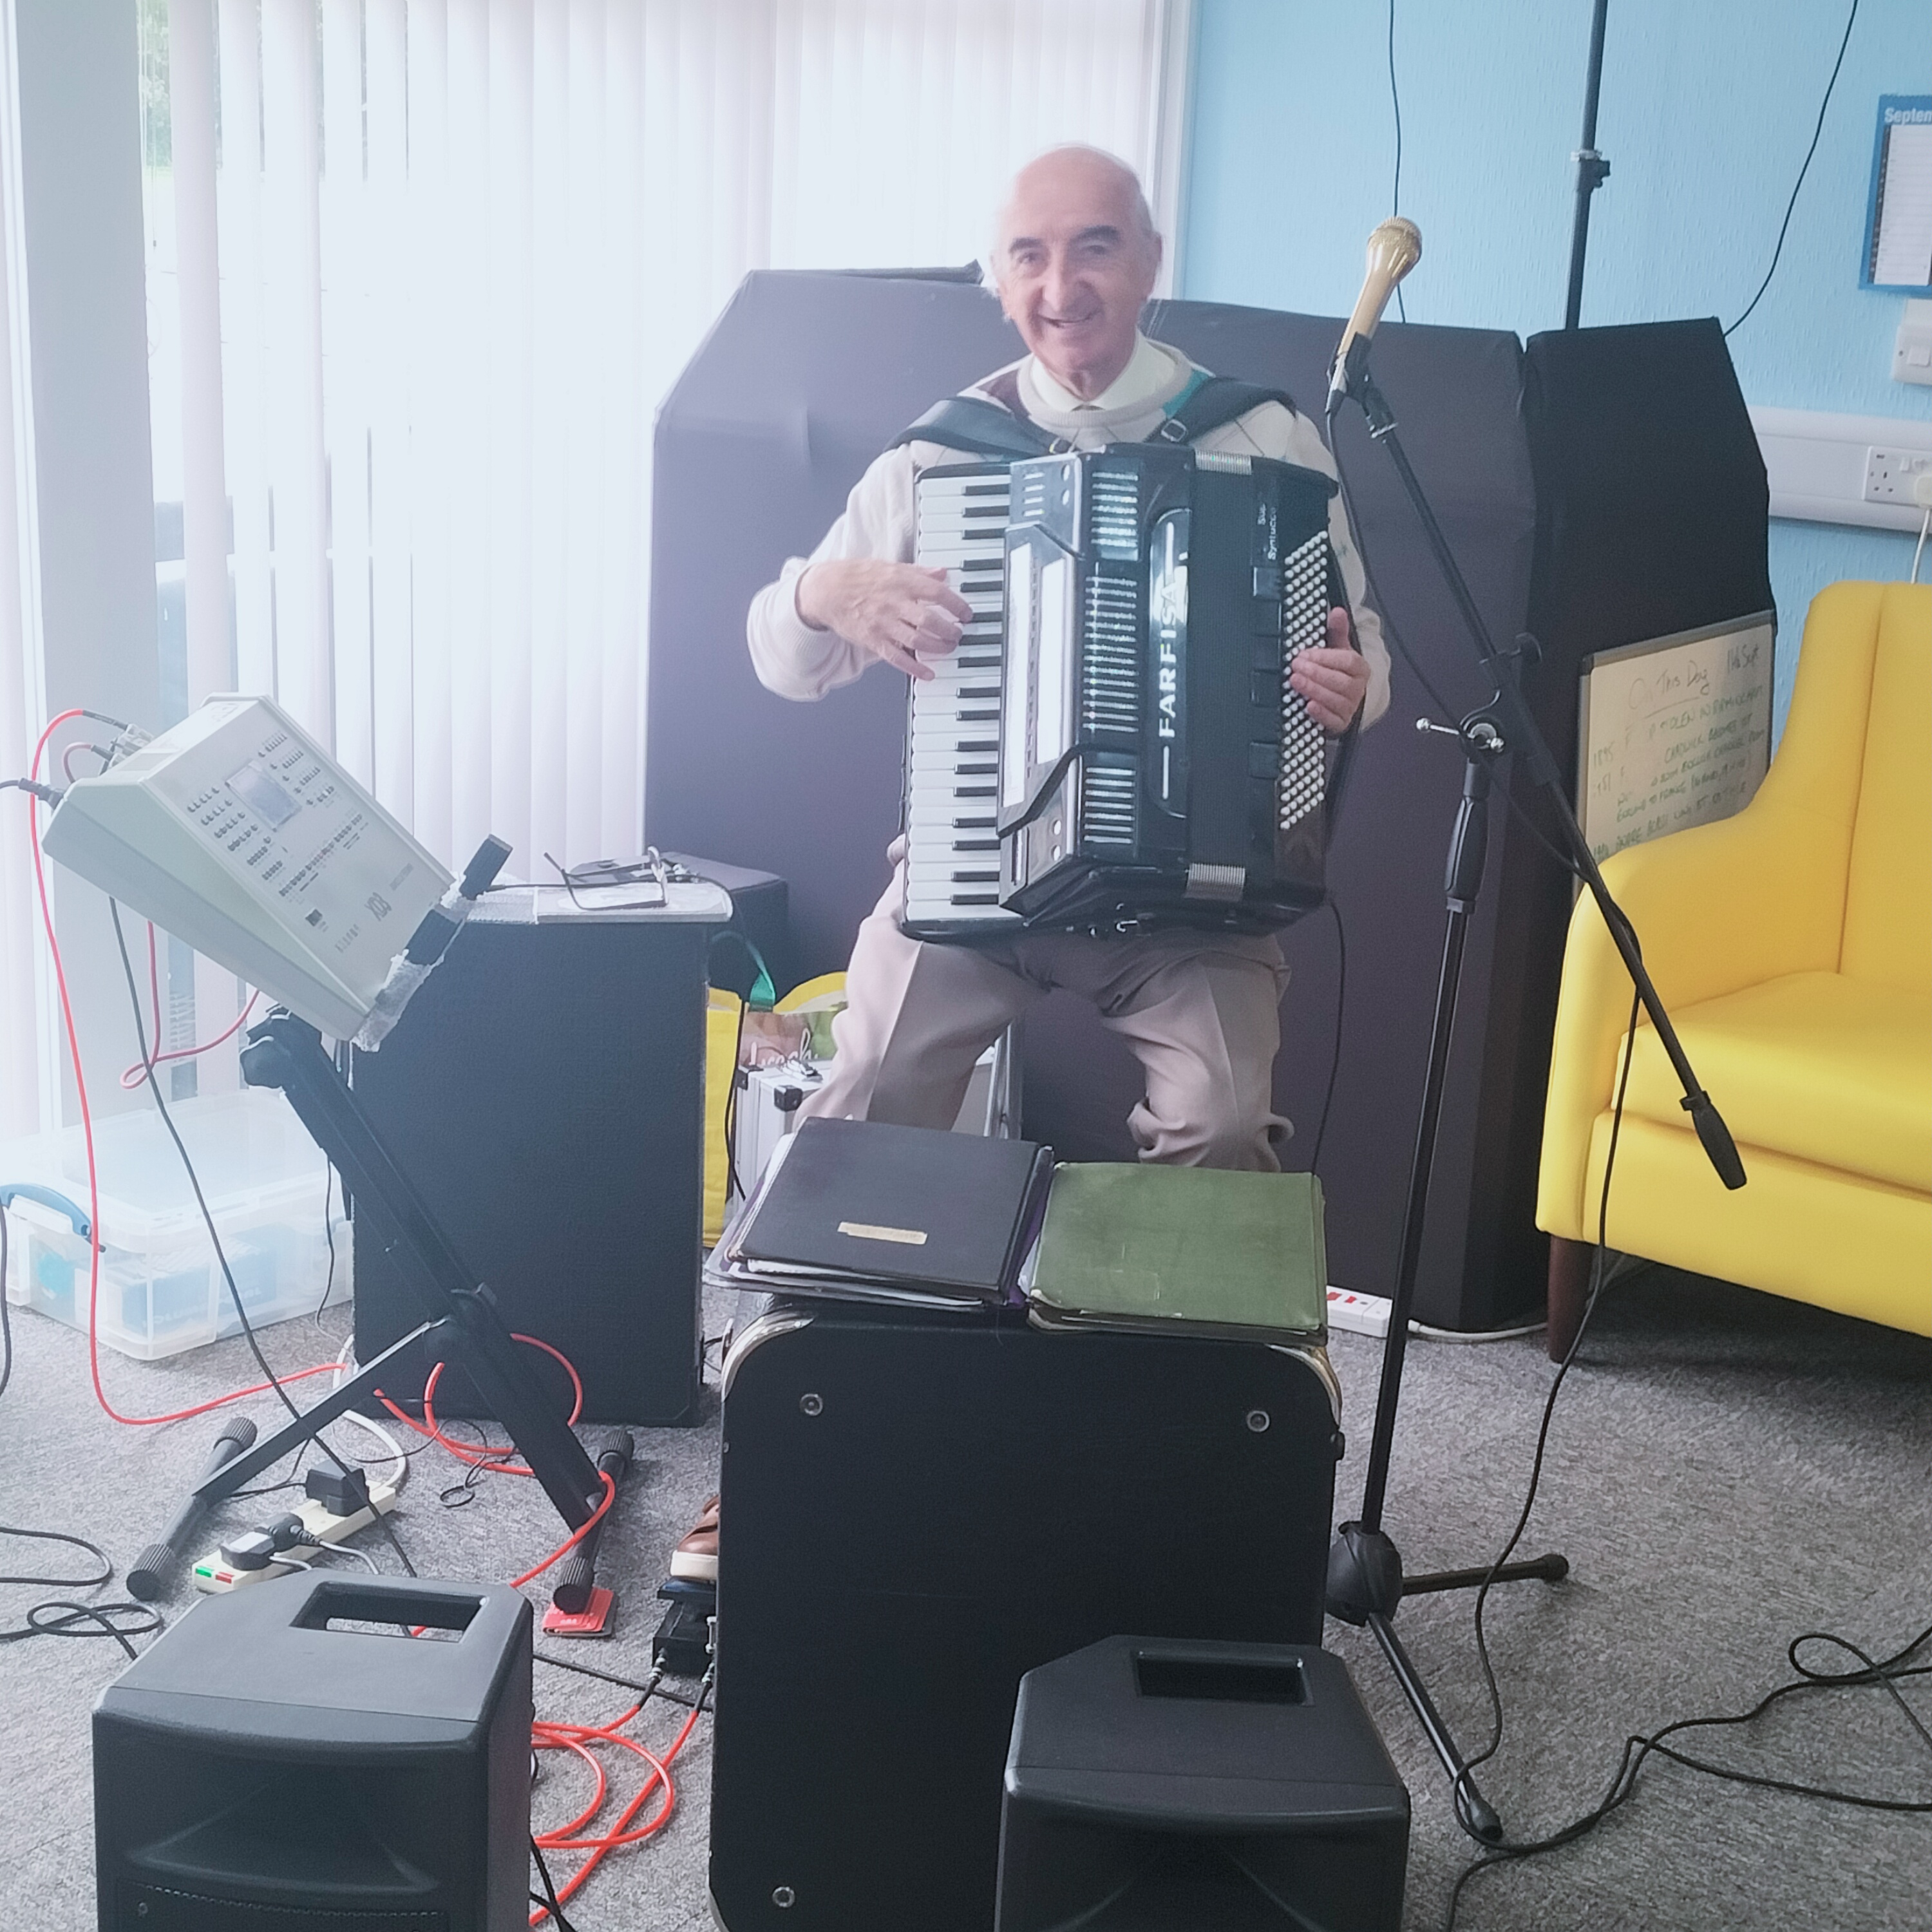 Local musician, Mike McEwan, providing the entertainment on the Accordion. 